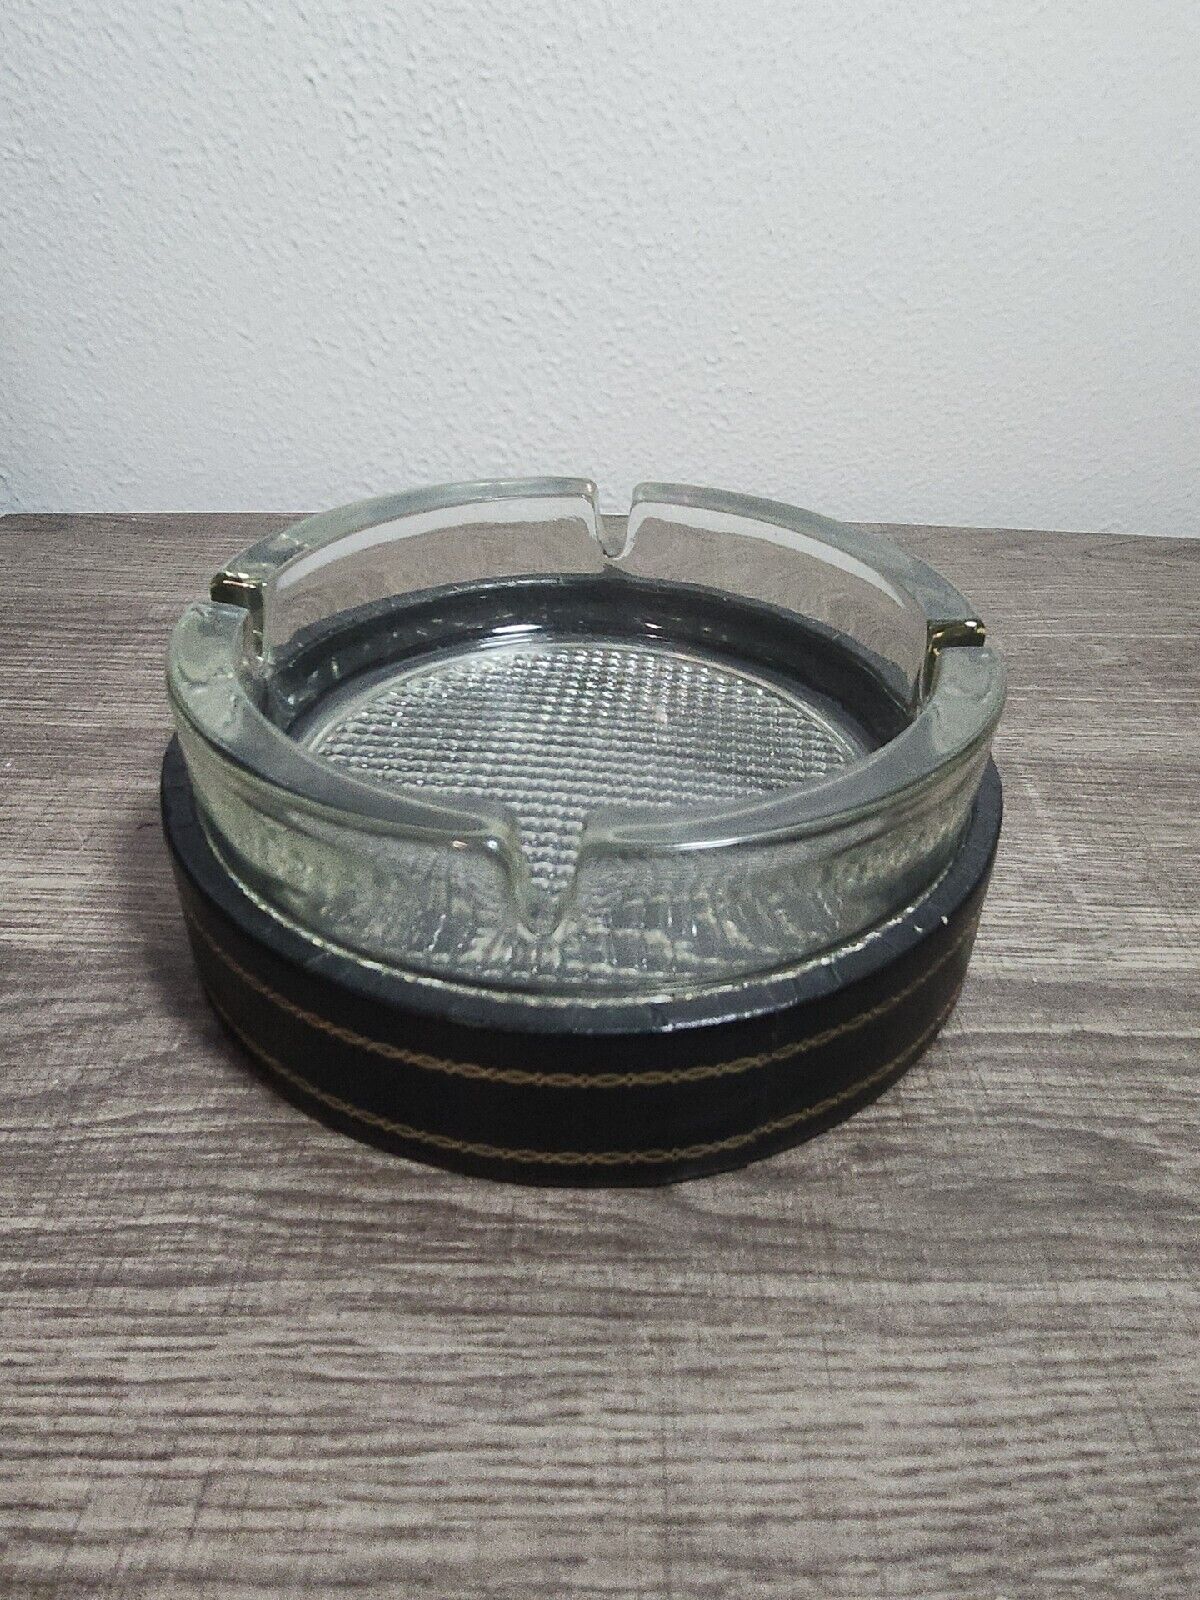 Vintage Clear Heavy Ashtray 4 Slot Cigarette And Holder